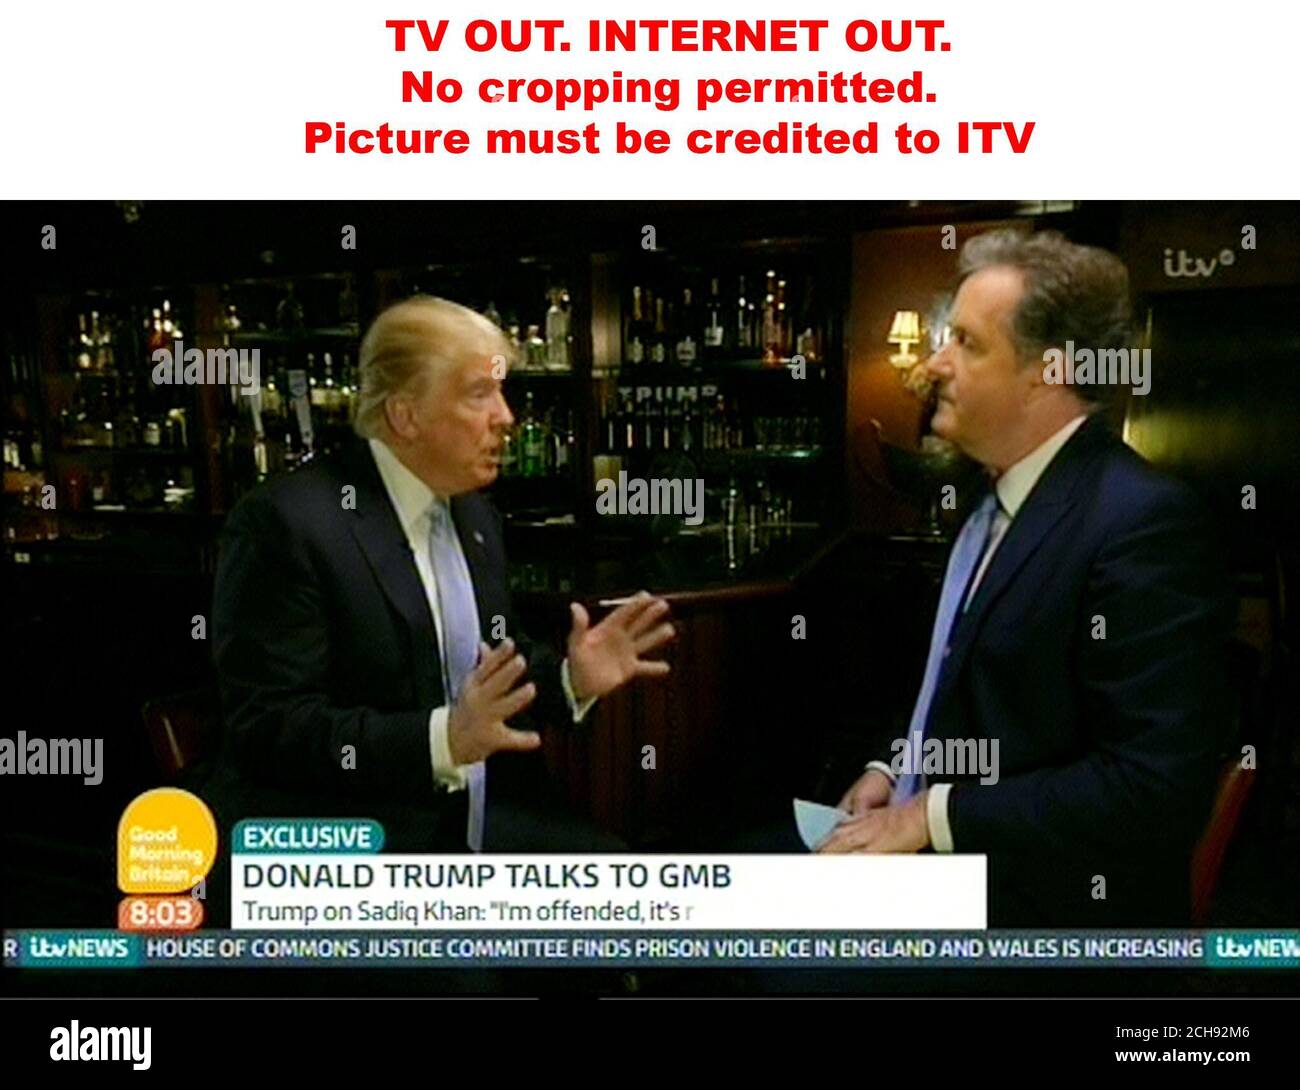 TV OUT. INTERNET OUT. No cropping permitted. Picture must be credited to ITV. We are advised that videograbs should not be used more than 48 hours after the time of original transmission, without the consent of the copyright holder. Video grab taken from ITV1 of Good Morning Britain host Piers Morgan (right) interviewing Republican presidential nominee Donald Trump. Stock Photo